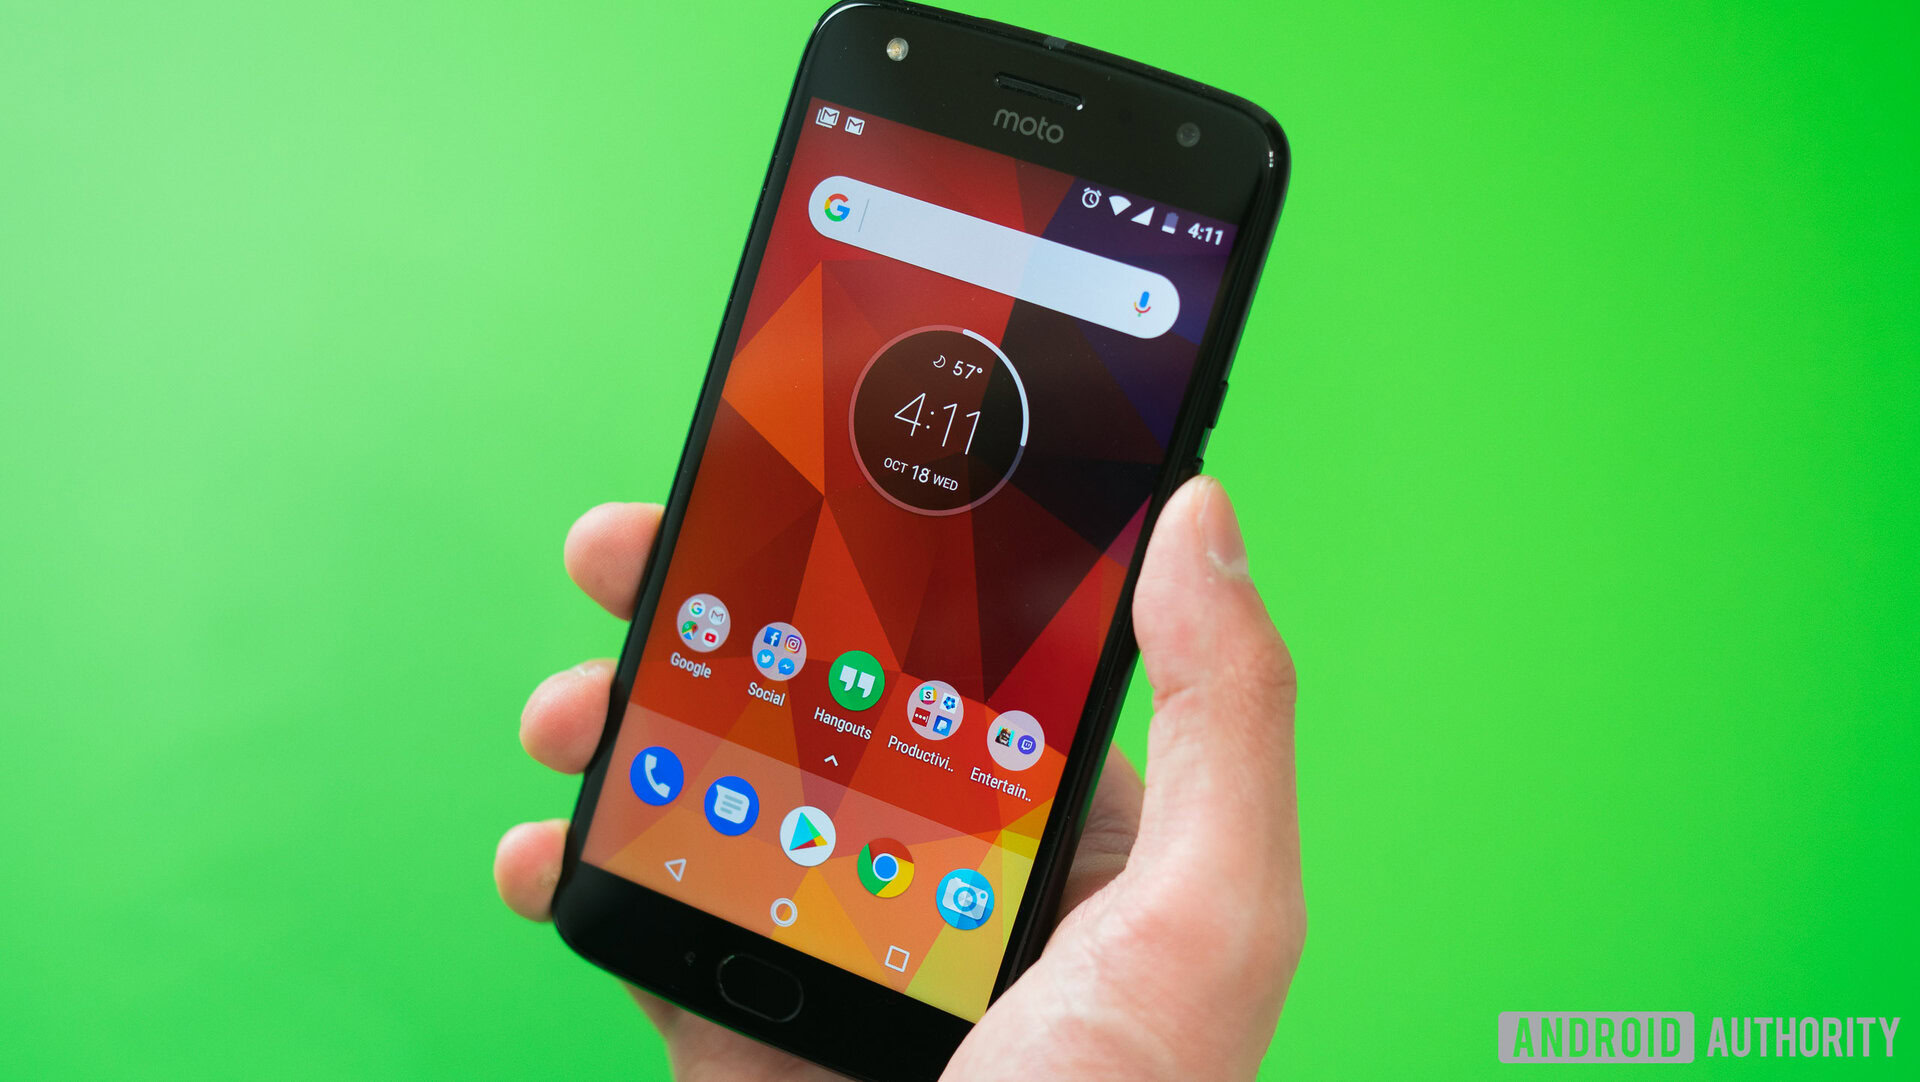 How to Download and Update Moto G4/G4 Plus to Android 8.1 Oreo